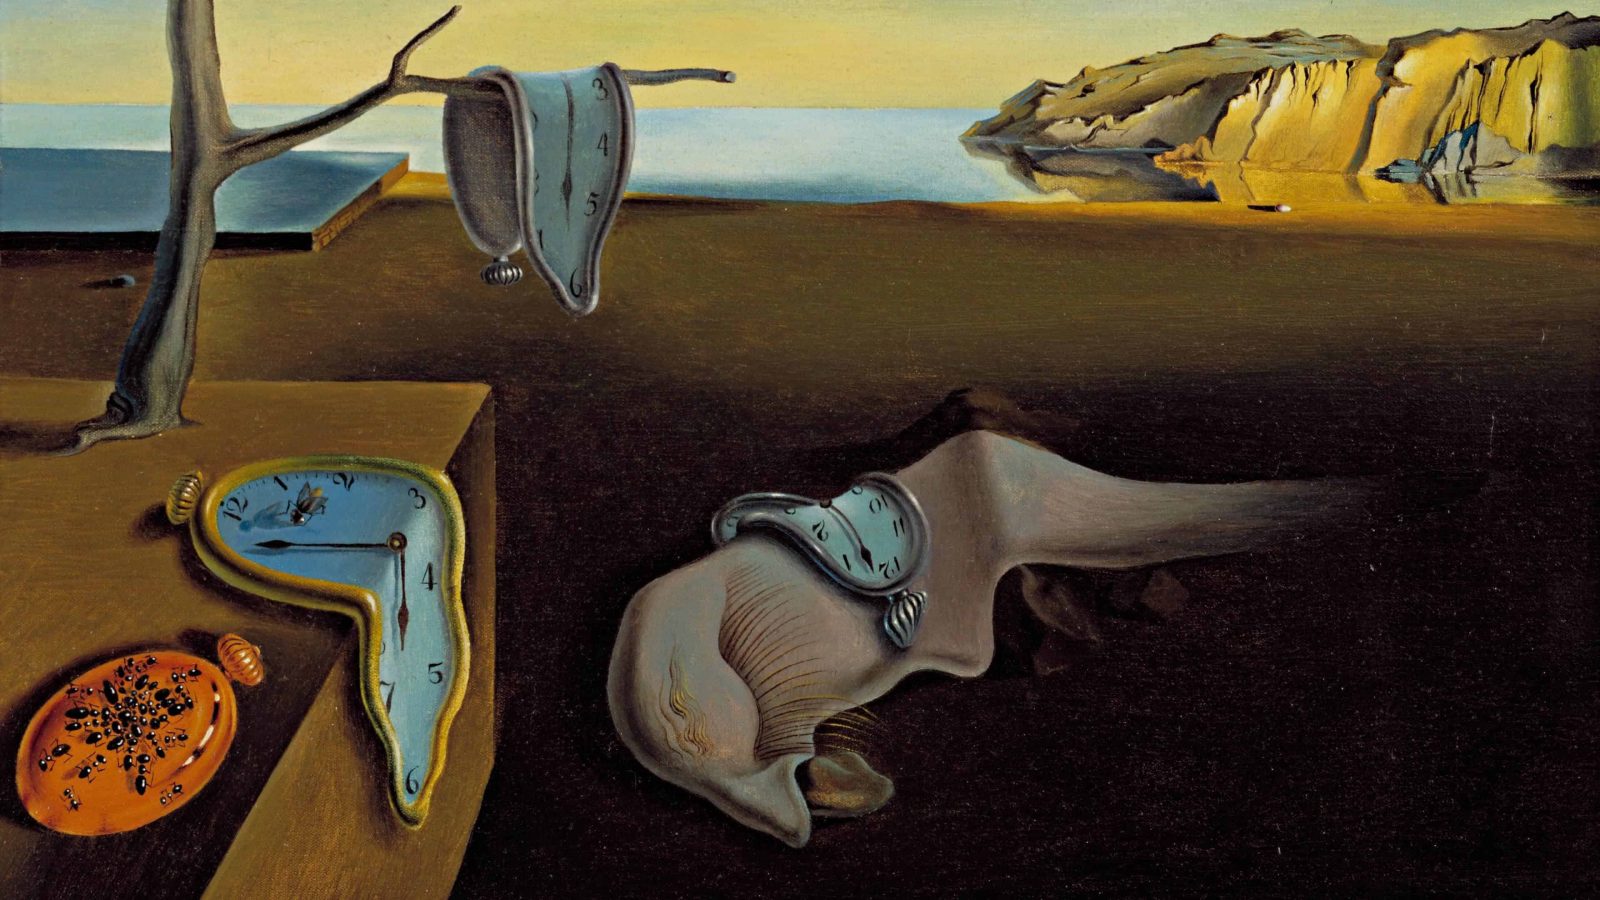 The Average Person Can Pass This General Knowledge Quiz, So to Impress Me, You’ll Have to Do Better Than That The Persistence Of Memory By Salvador Dalí